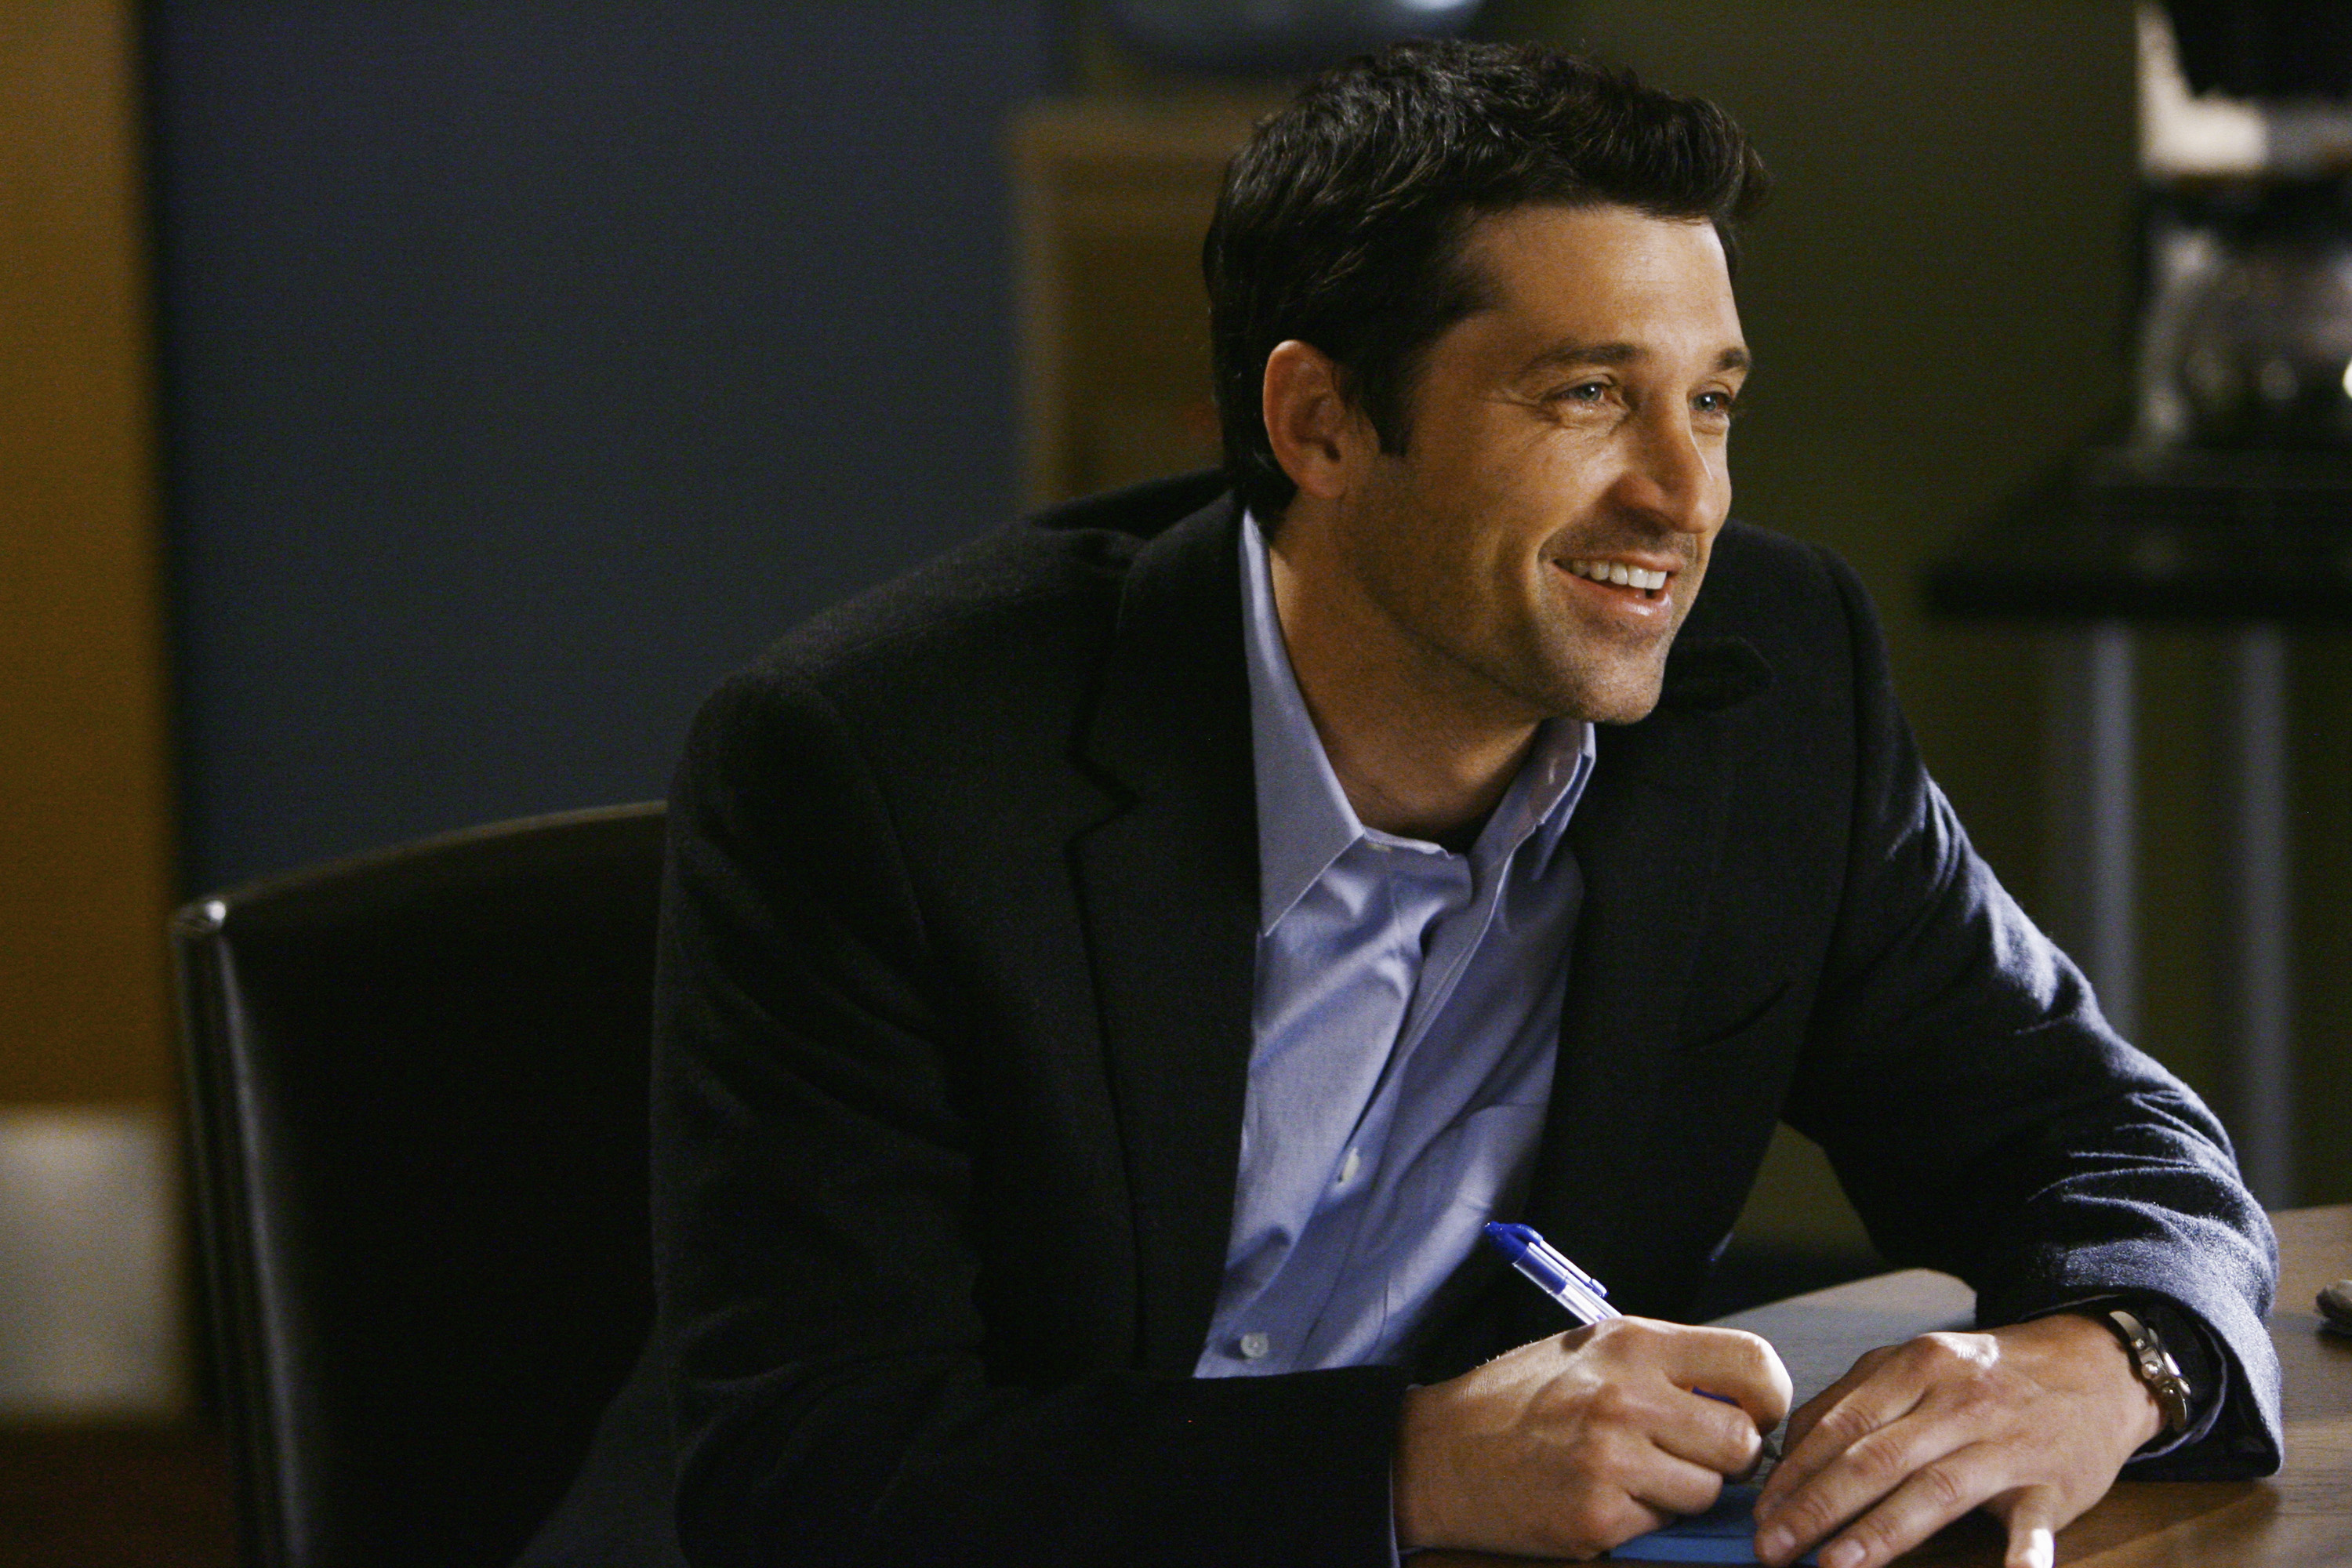 File Photo of Patrick Dempsey as he stars as "McDreamy" in Greys Anatomy. (Scott Garfield—ABC via Getty Images)